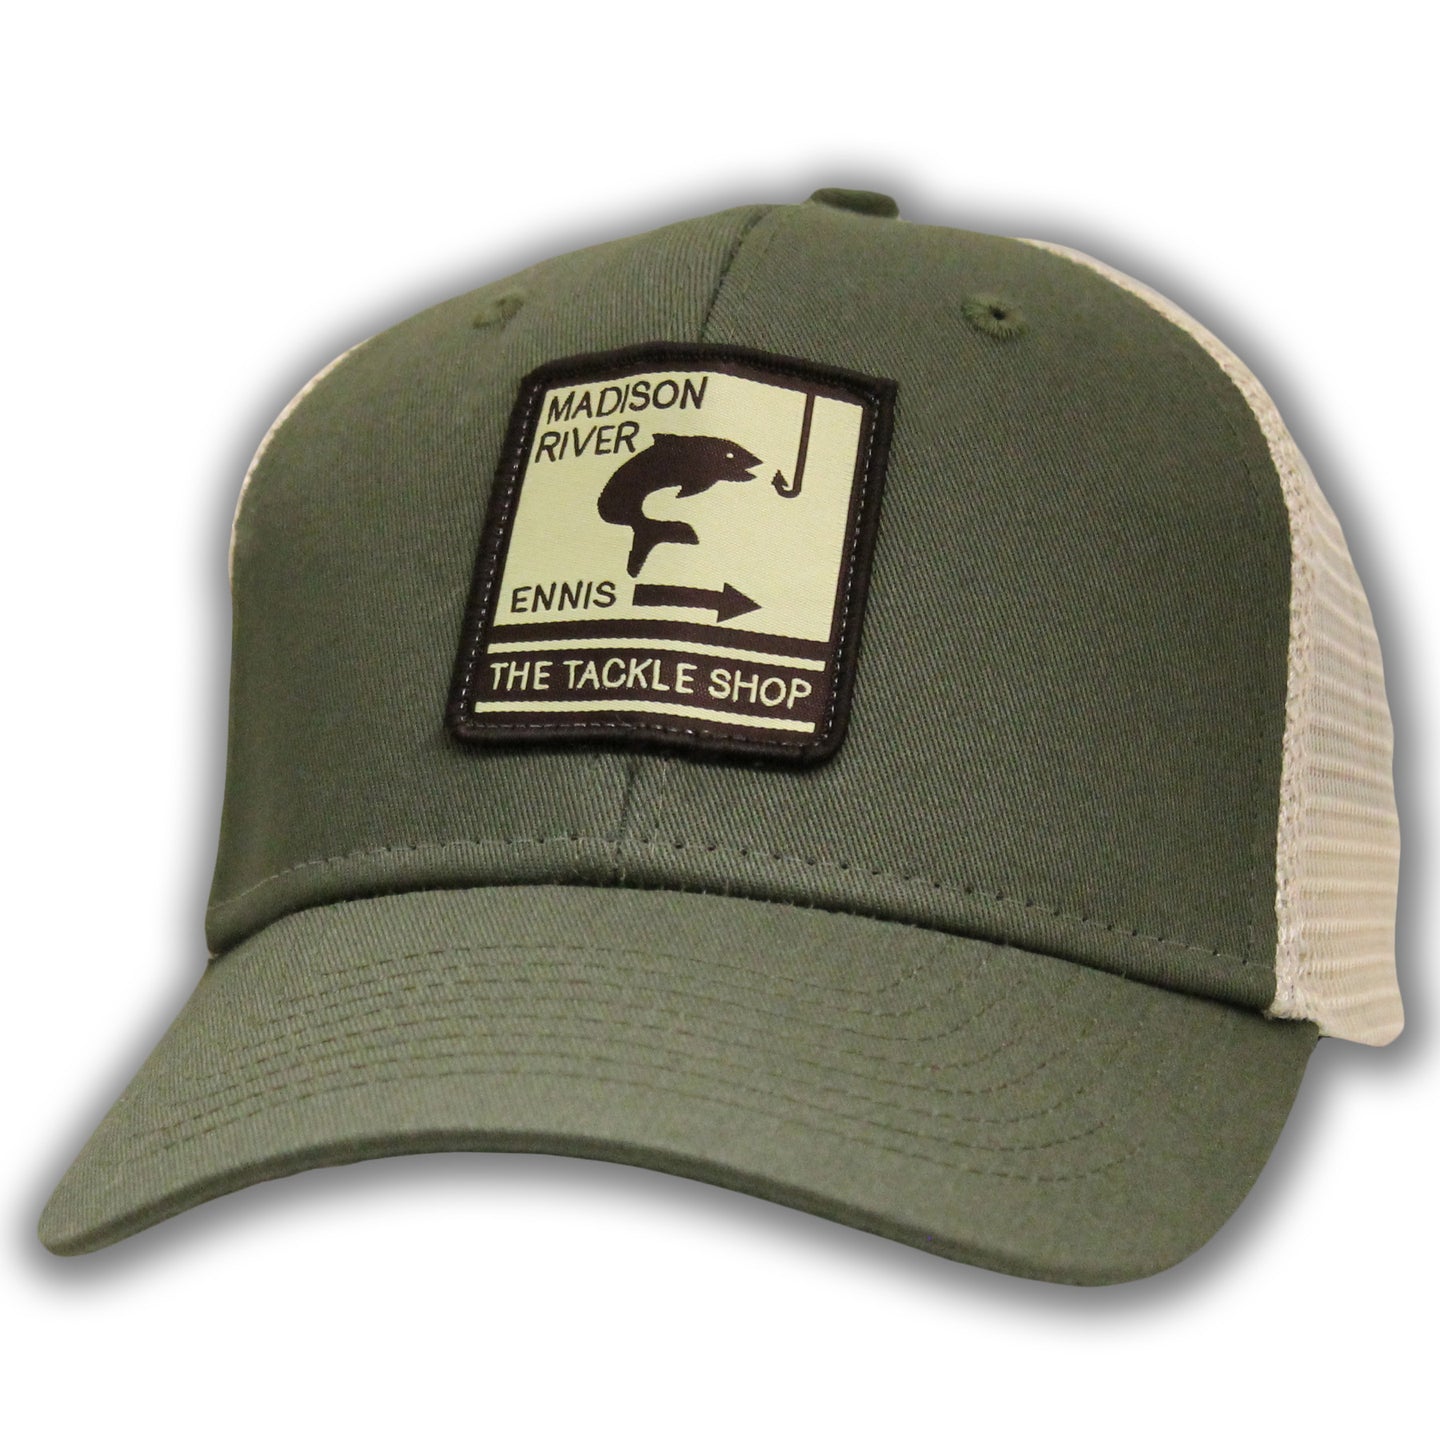 Ouray Soft Mesh Sideline Tackle Shop Hat